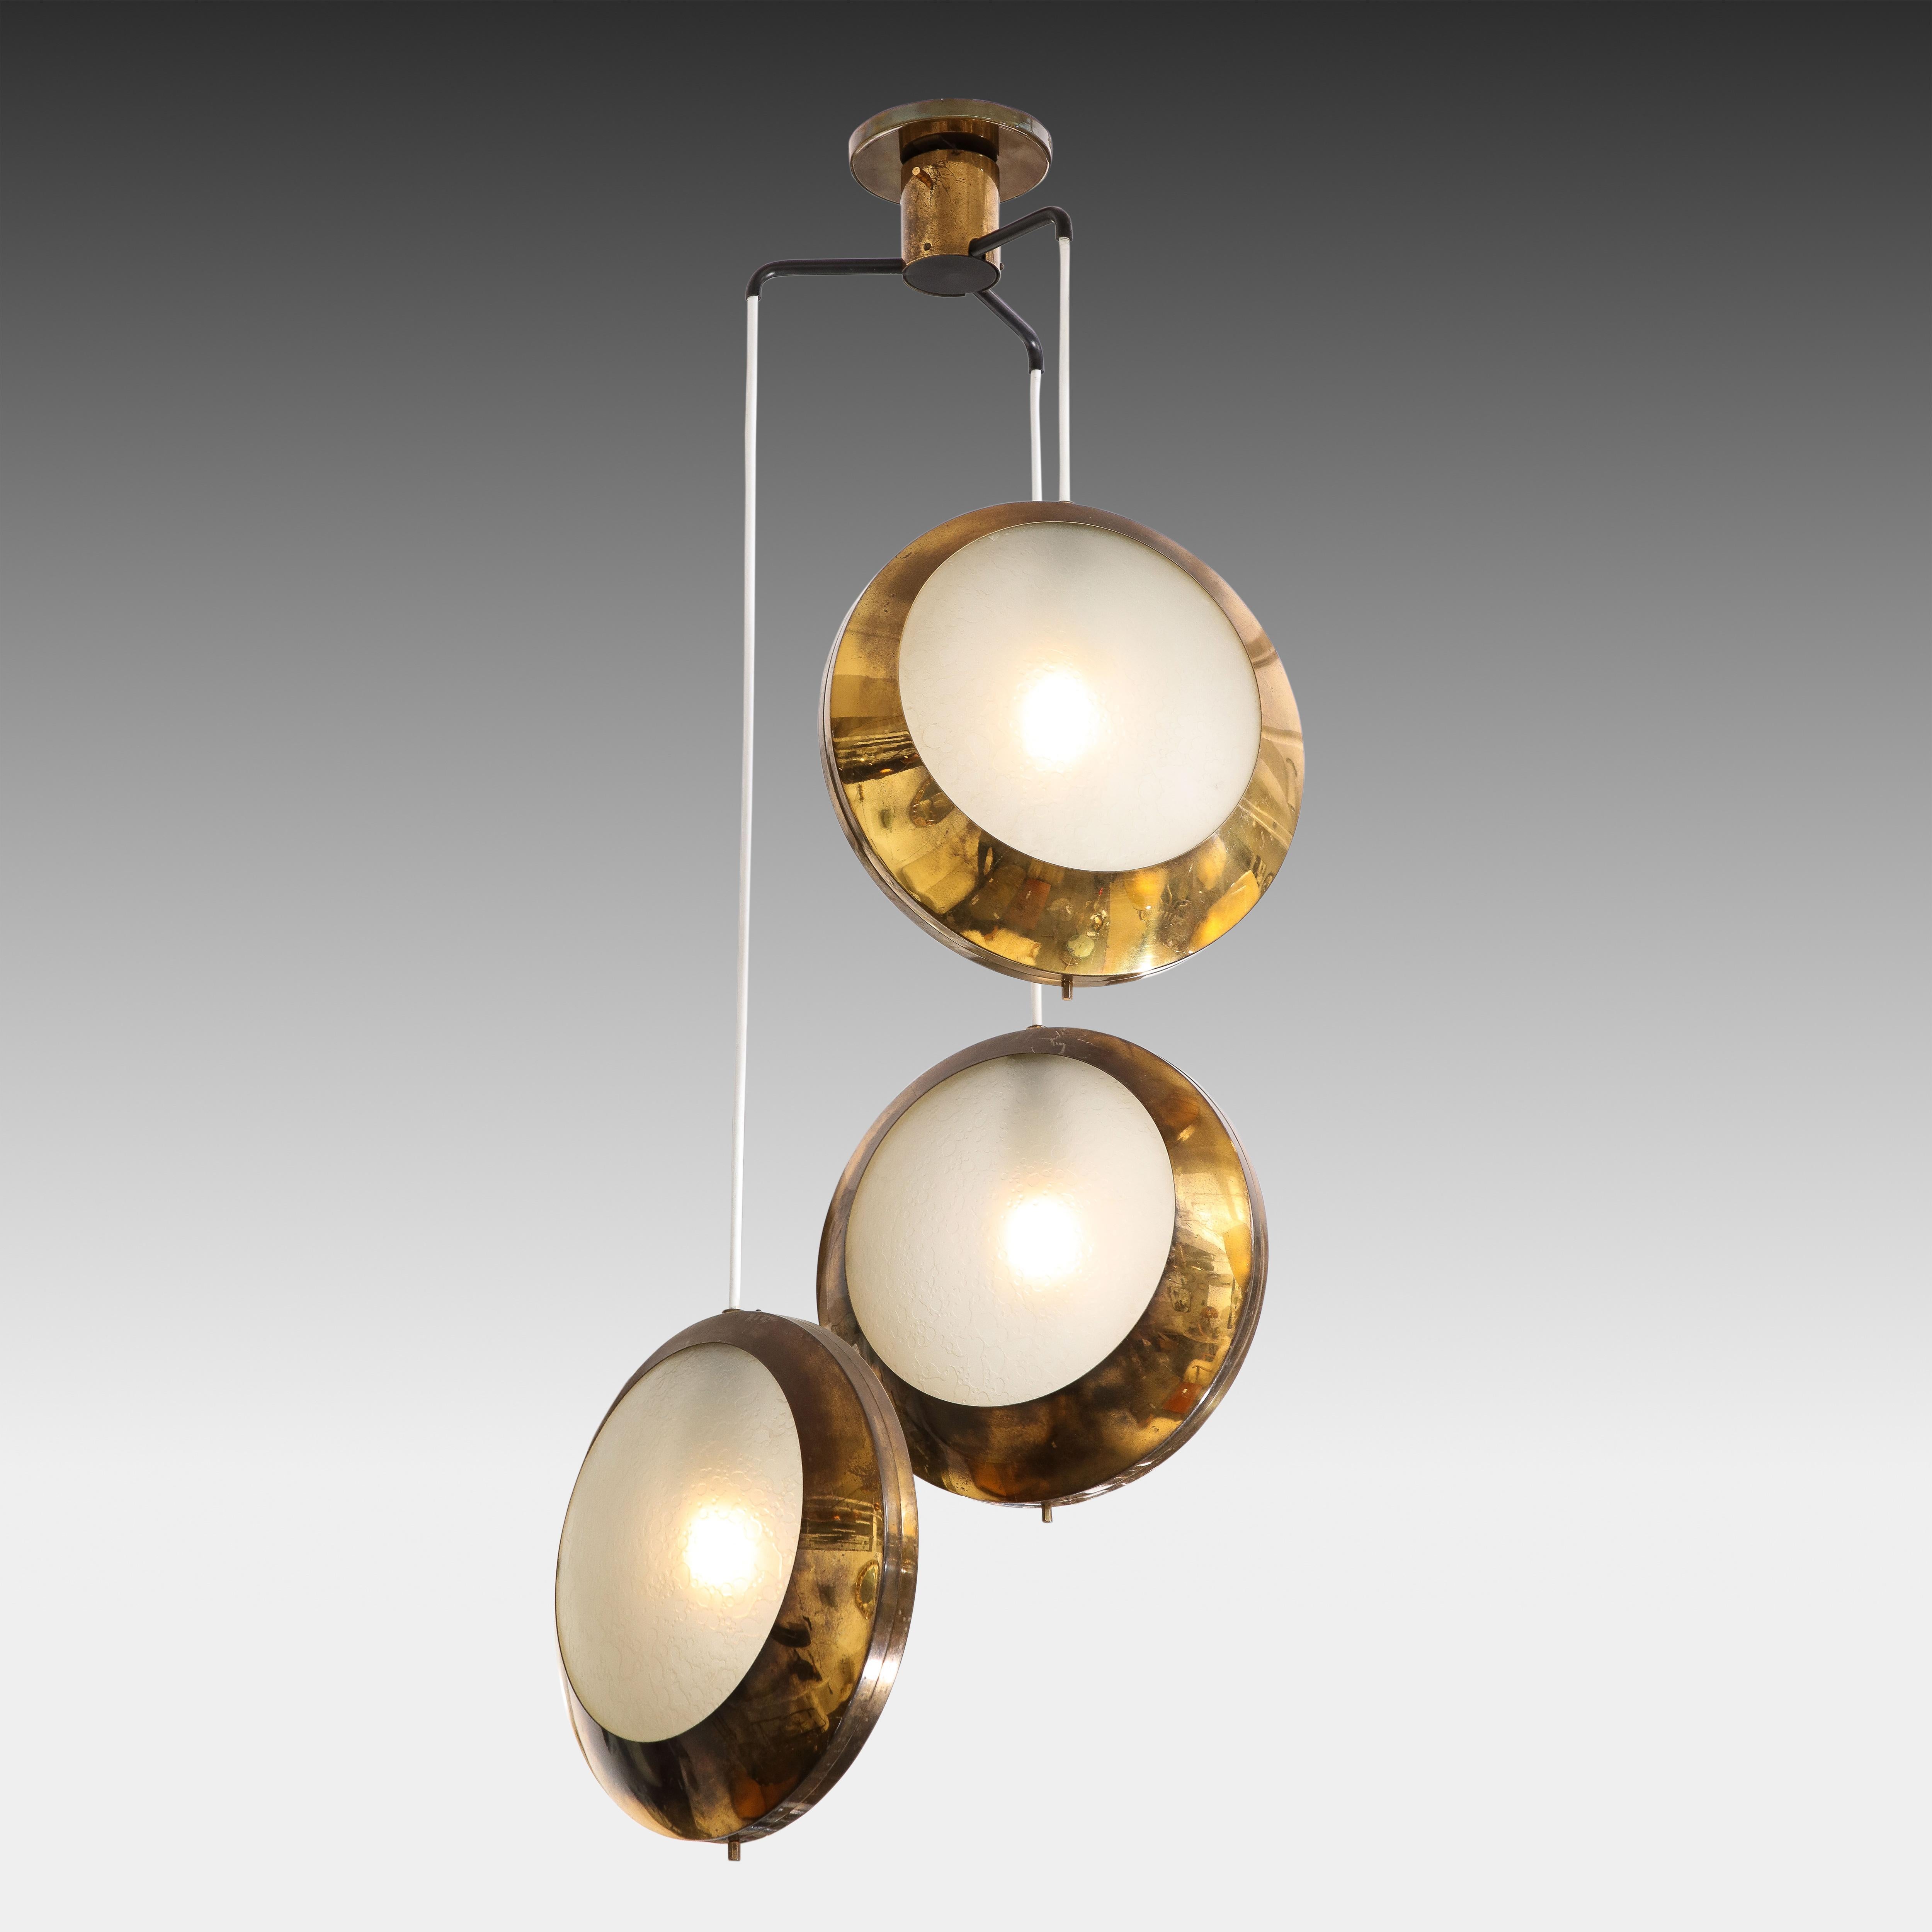 Stilnovo rare pendant light or chandelier model 1205 with three shades made of brass with textured acid-etched glass diffusers at alternating heights suspended from original canopy, Italy 1950s. This pendant light is simple yet striking and